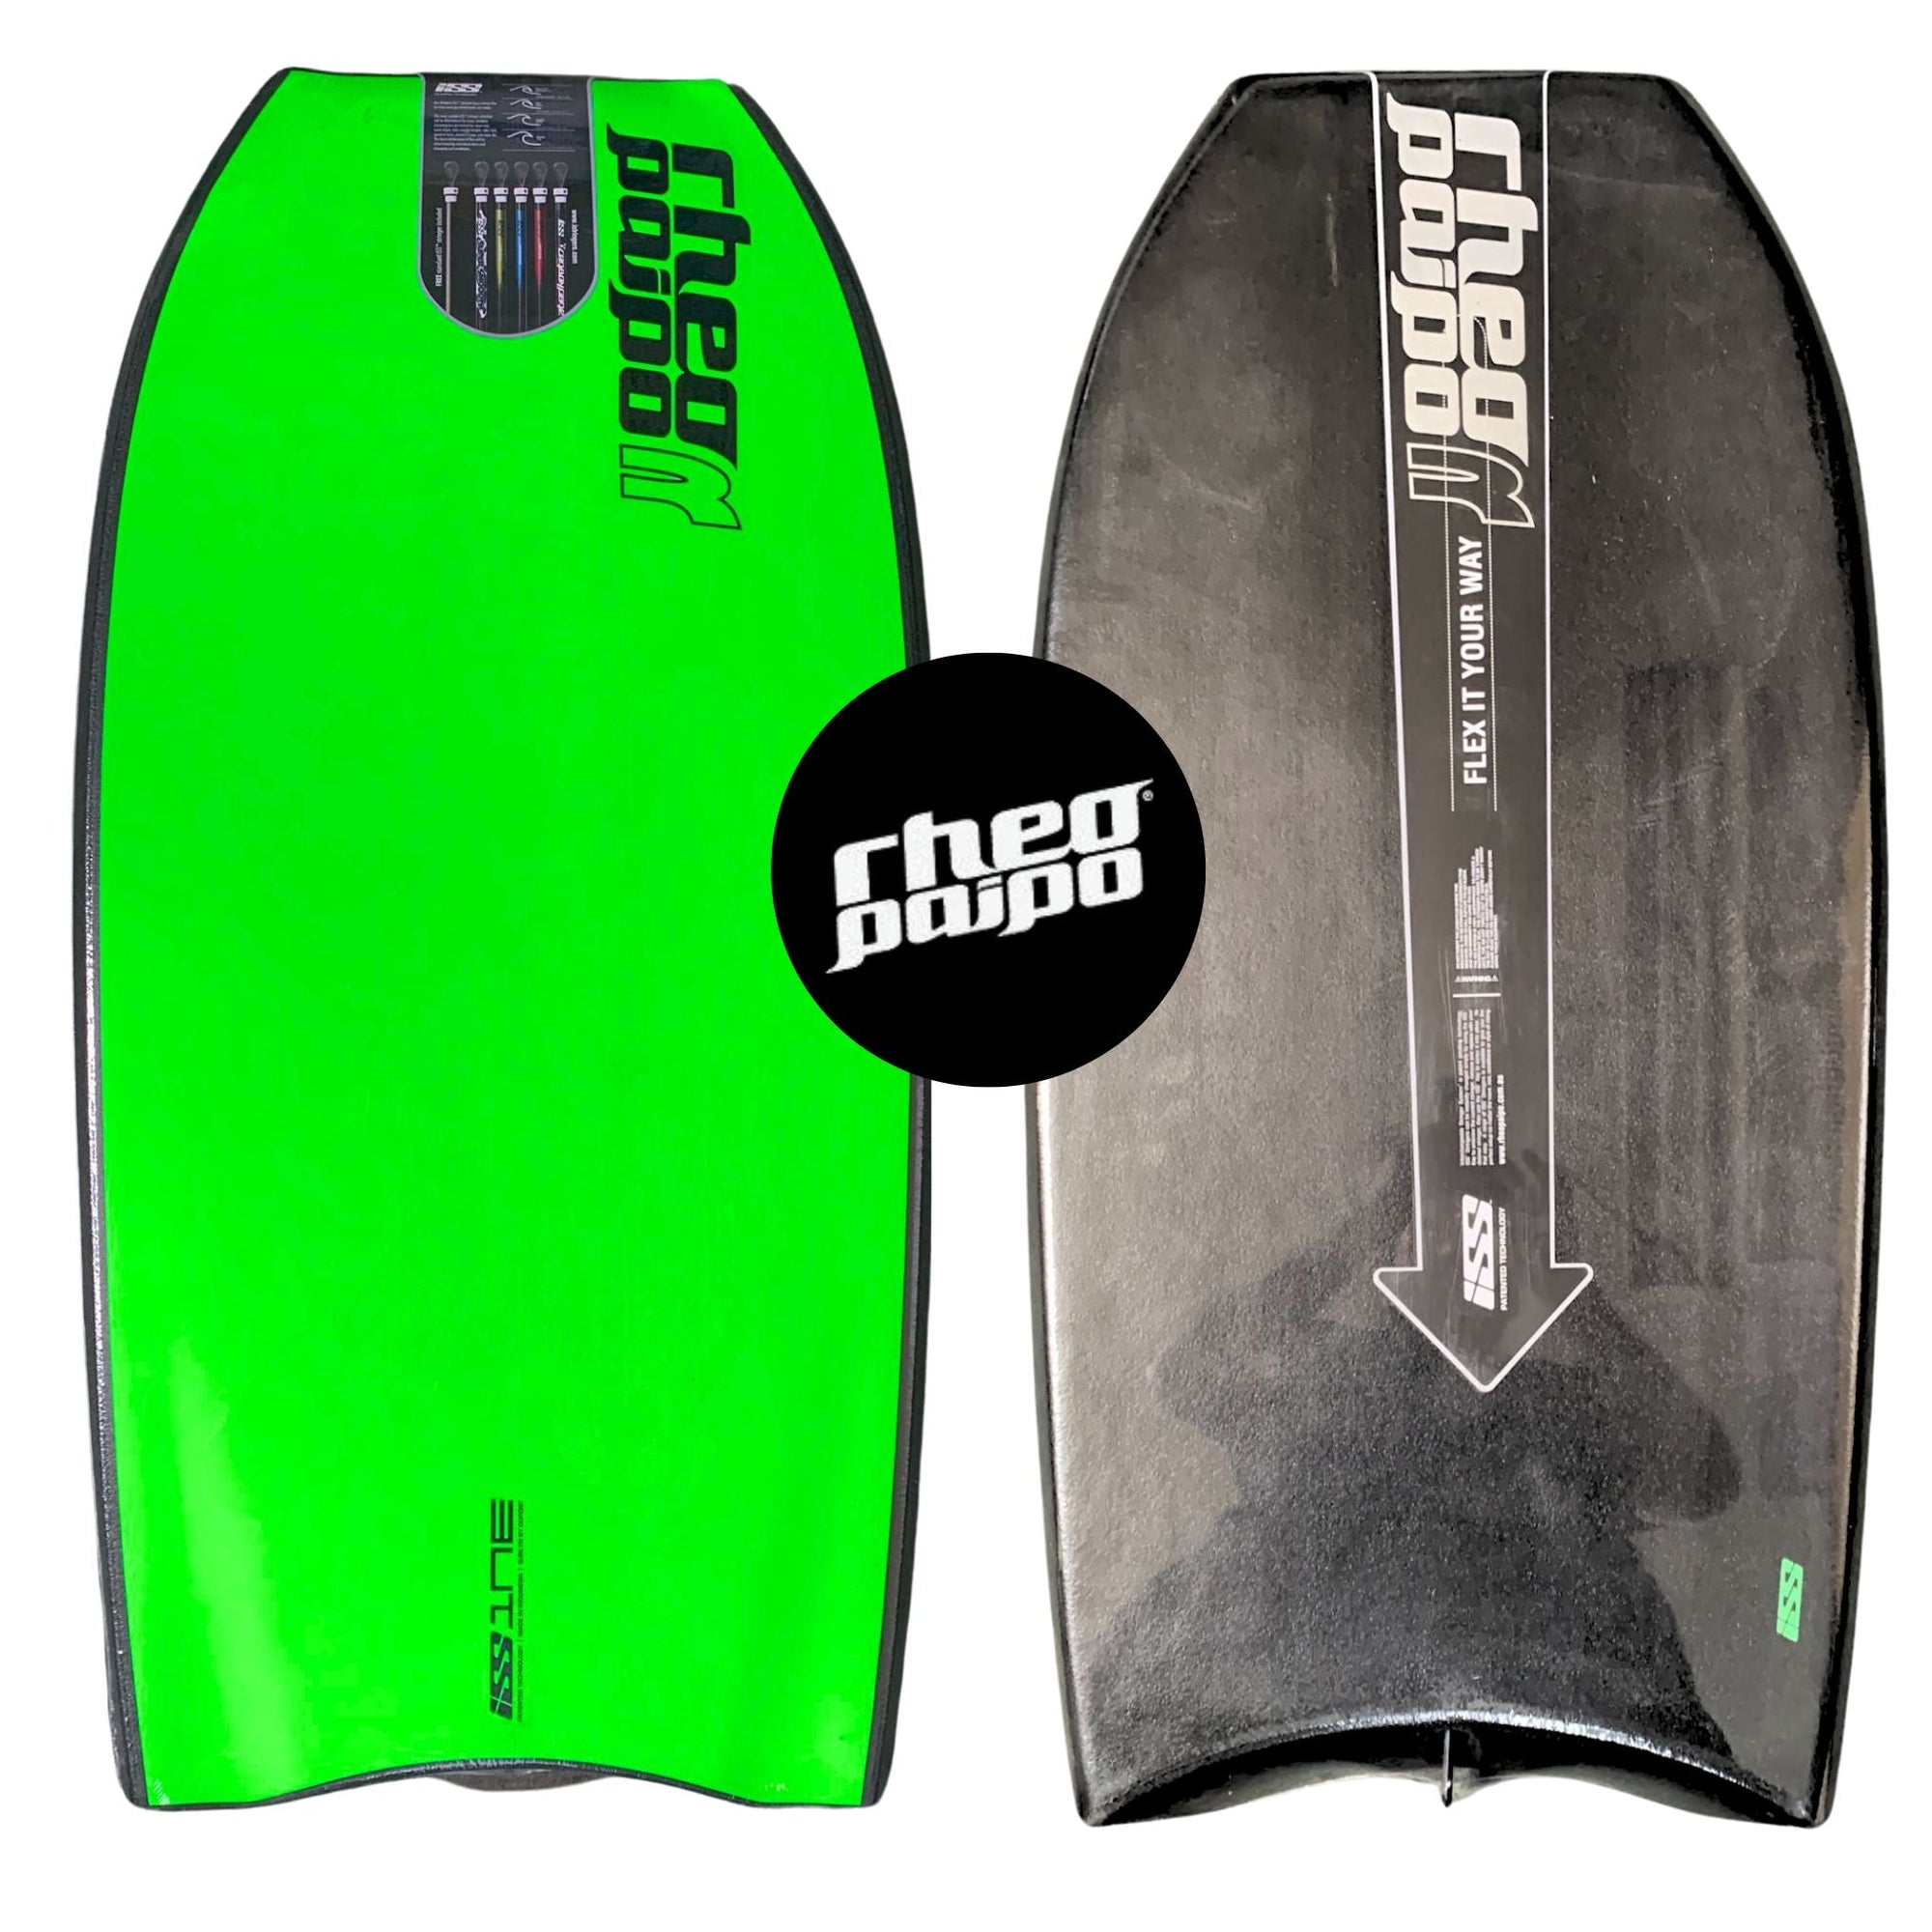 RheoPaipo ISS Body Board GREEN/BLACK 1NE, PP KINETIC CORE 41" - South East Clearance Centre